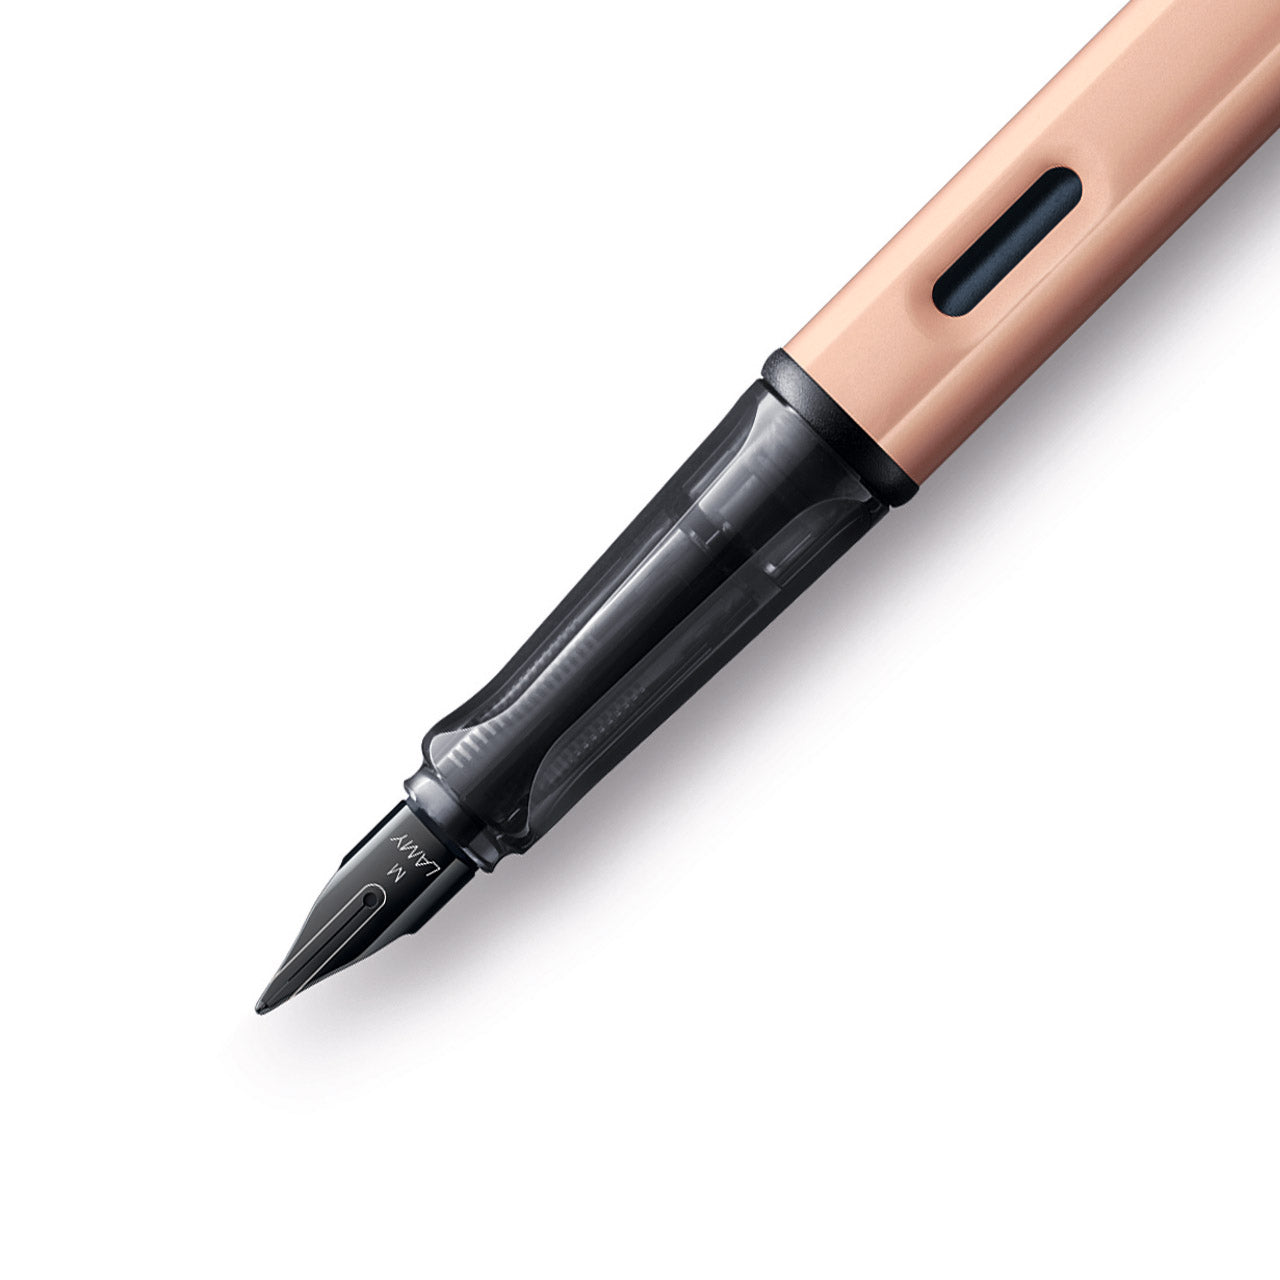 Lamy Lx Rose Gold Fountain Pen - Pencraft the boutique